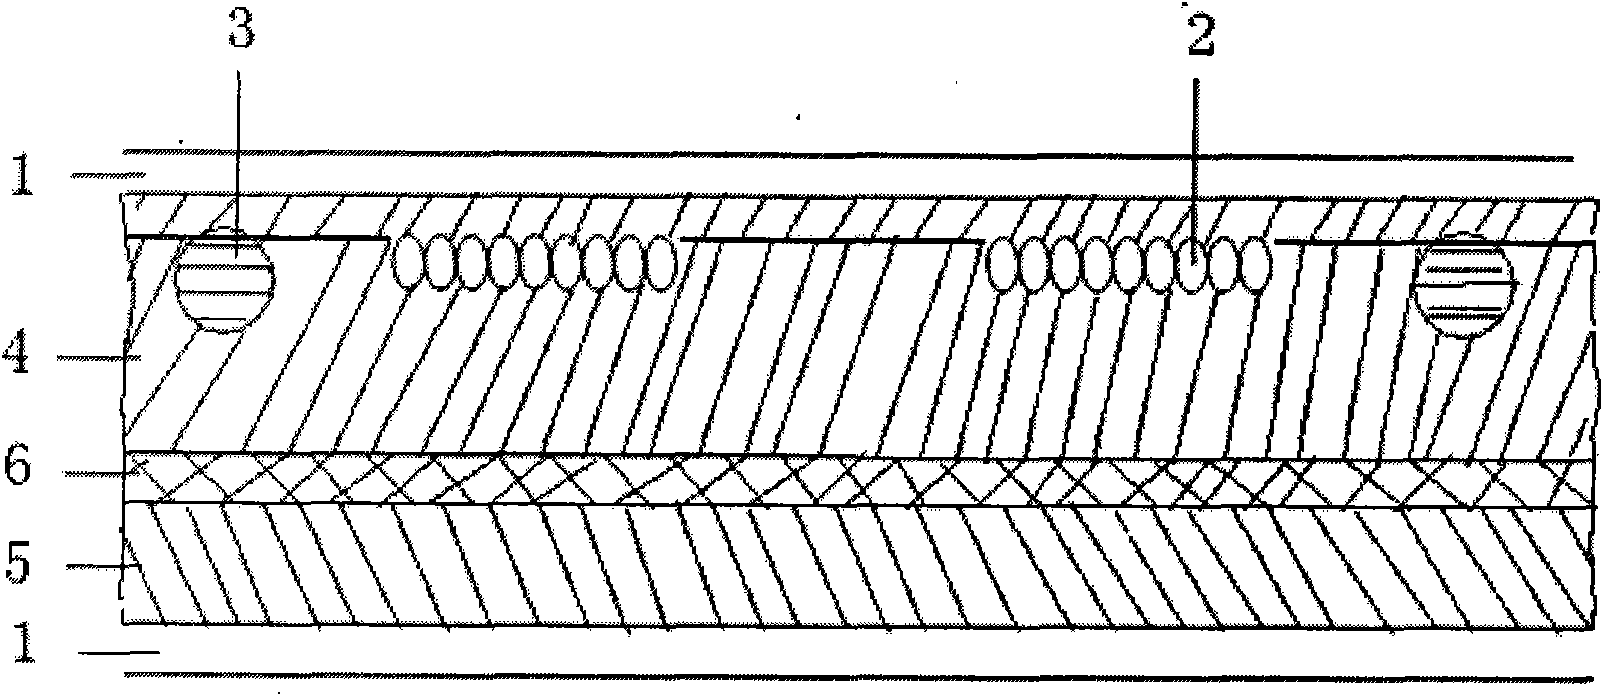 Fluorine-containing ion exchange membrane with reinforced sacrificial fiber mesh cloth